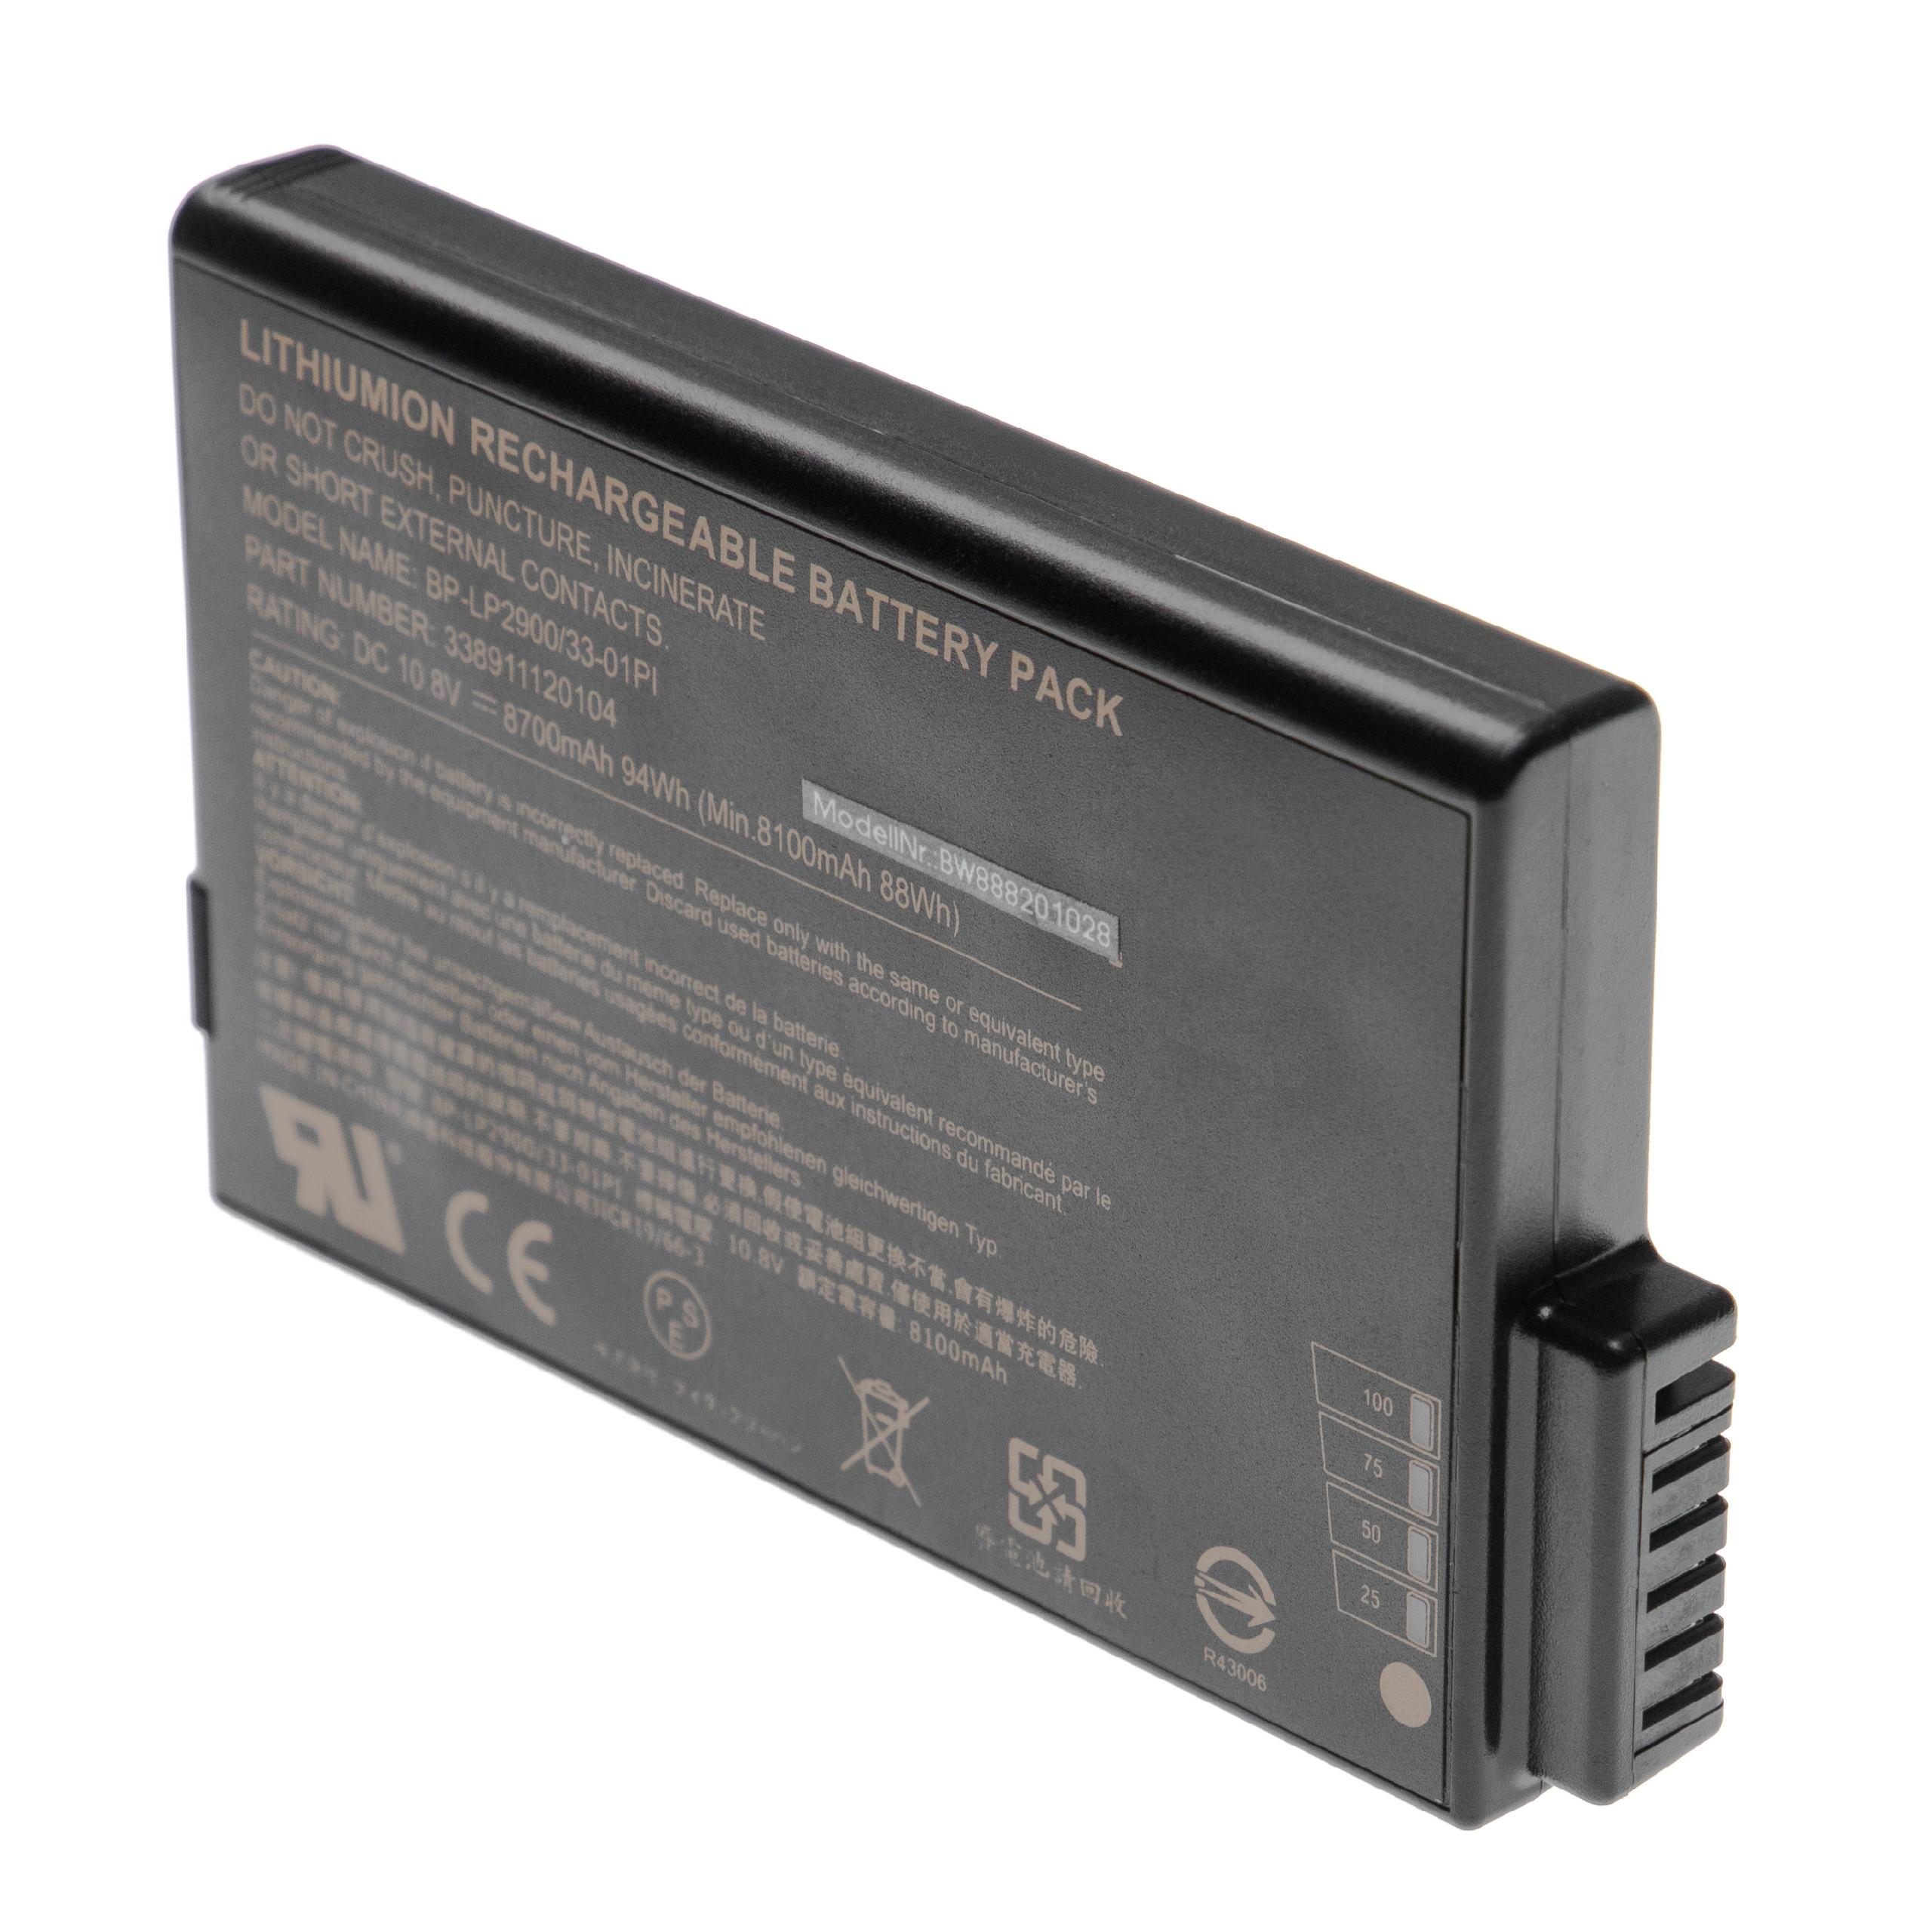 Notebook Battery Replacement for Getac / Hasee 33-01PI, 338911120104, BP-LP2900 - 8700mAh 10.8V Li-Ion, black